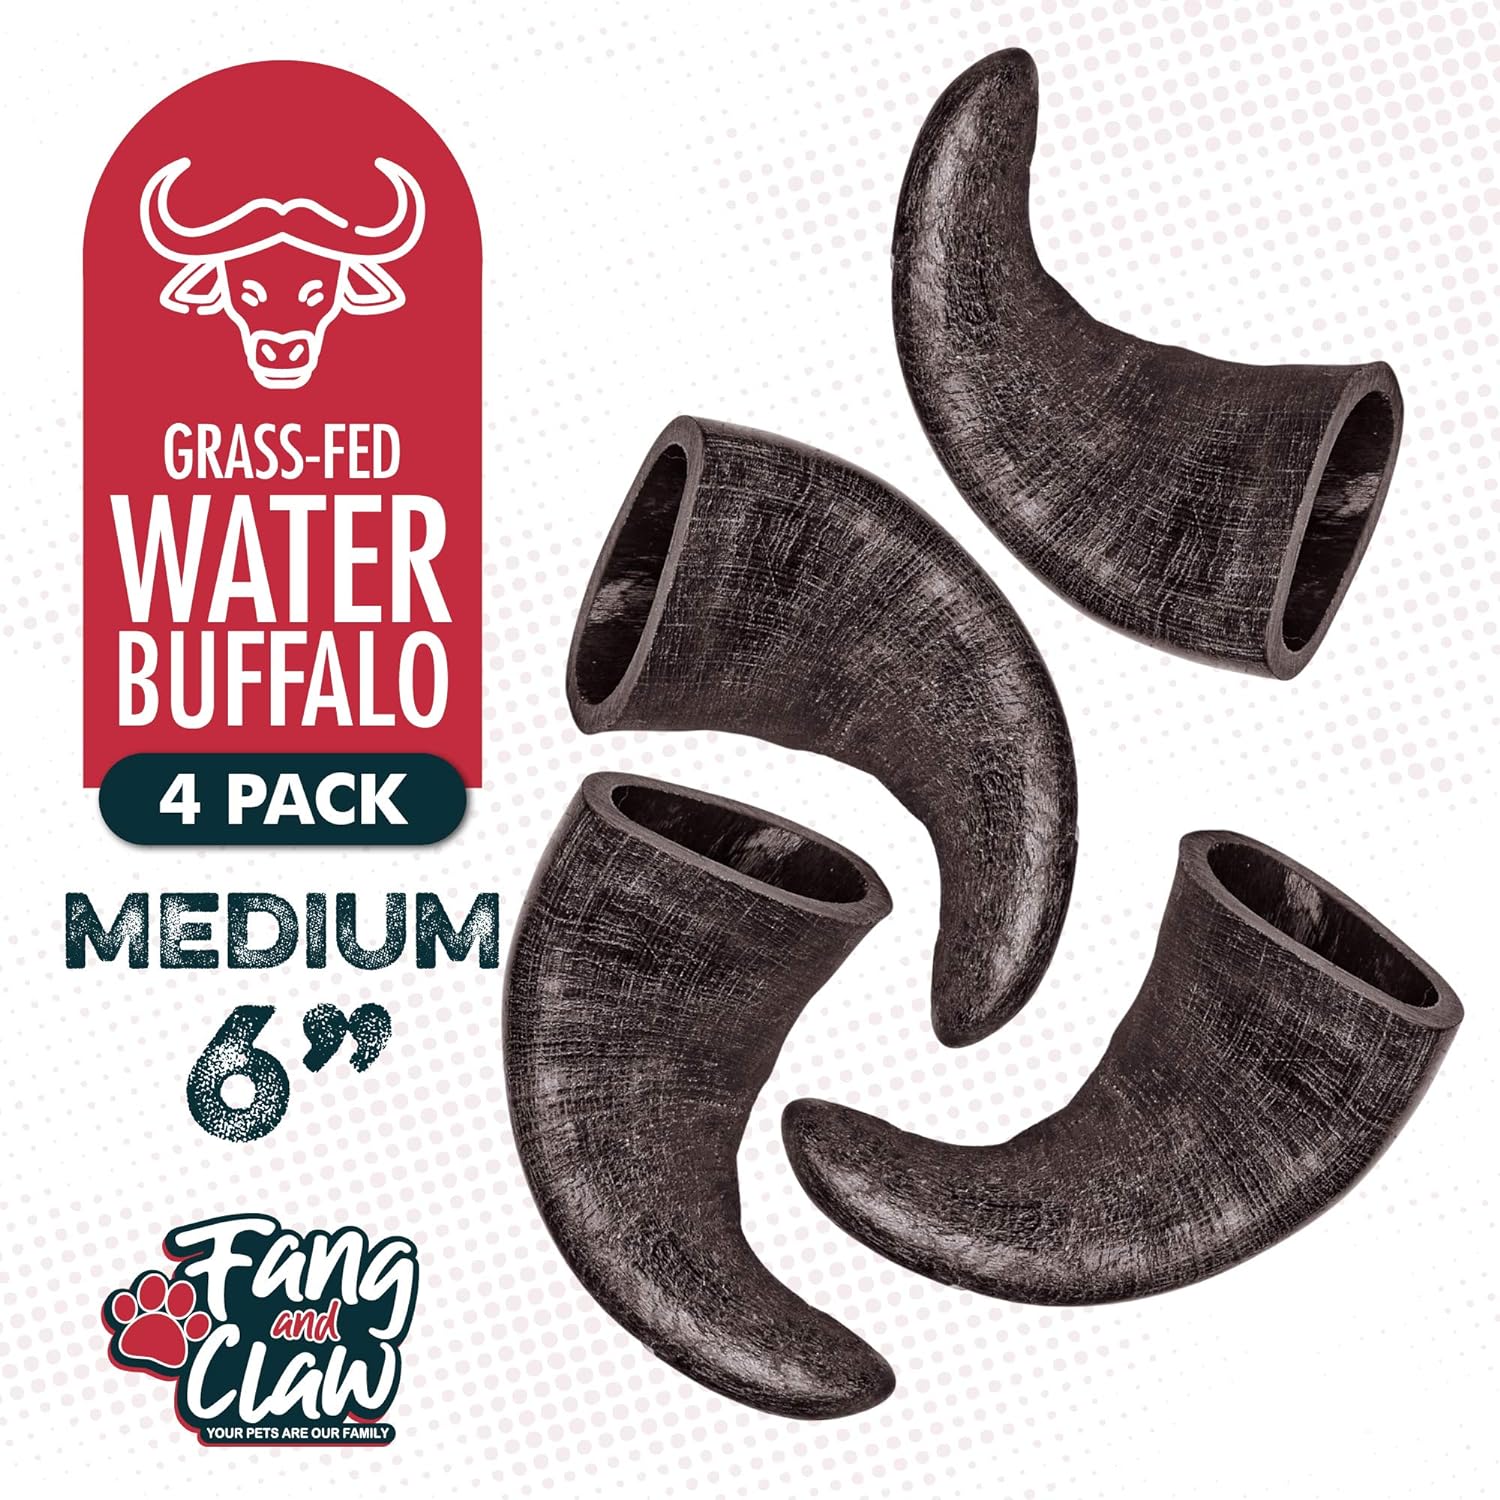 Water Buffalo Horn Dog Chew 4 Pack - Medium 6" - All Natural Free Range Grass Fed Single Source Protein - No Chemicals, Additives, Hormones - Long Lasting, Good for Aggressive Chewers – by Fang & Claw : Pet Supplies